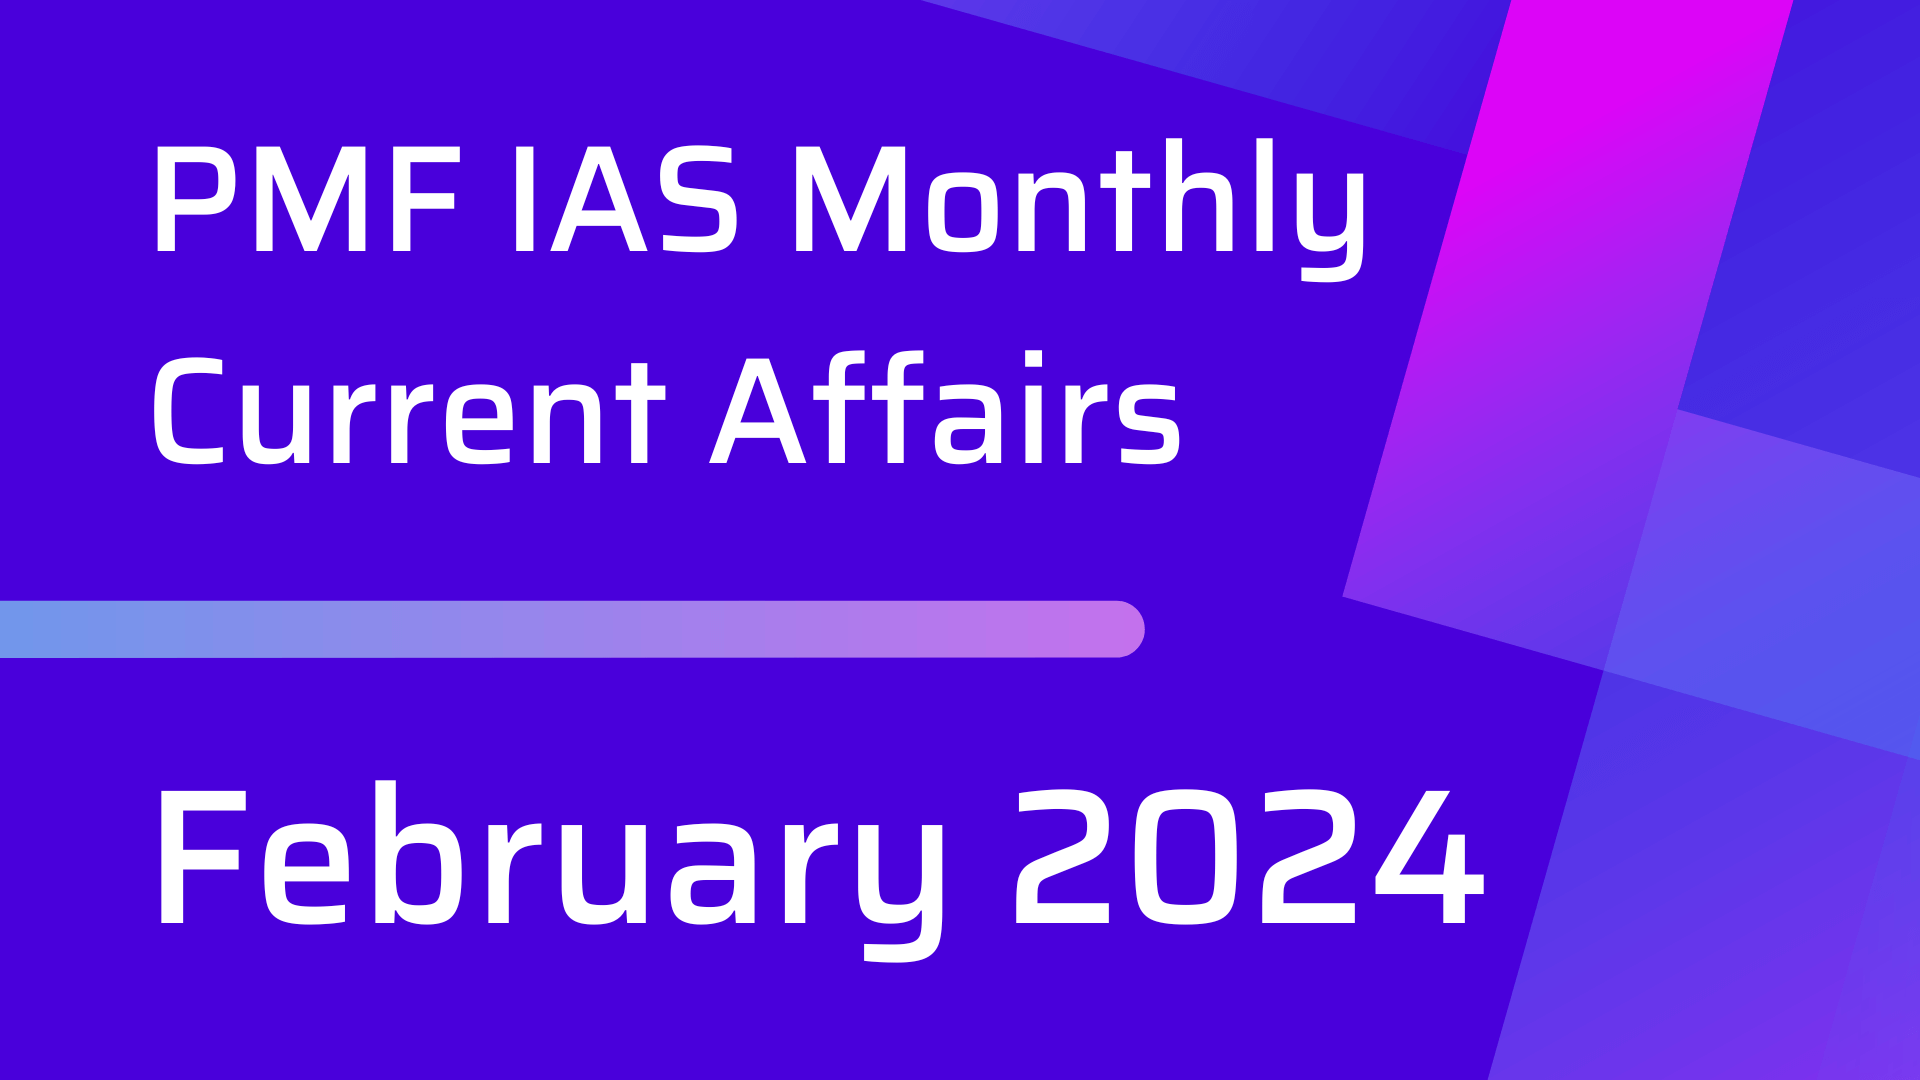 PMF IAS Daily Current Affairs February 2024